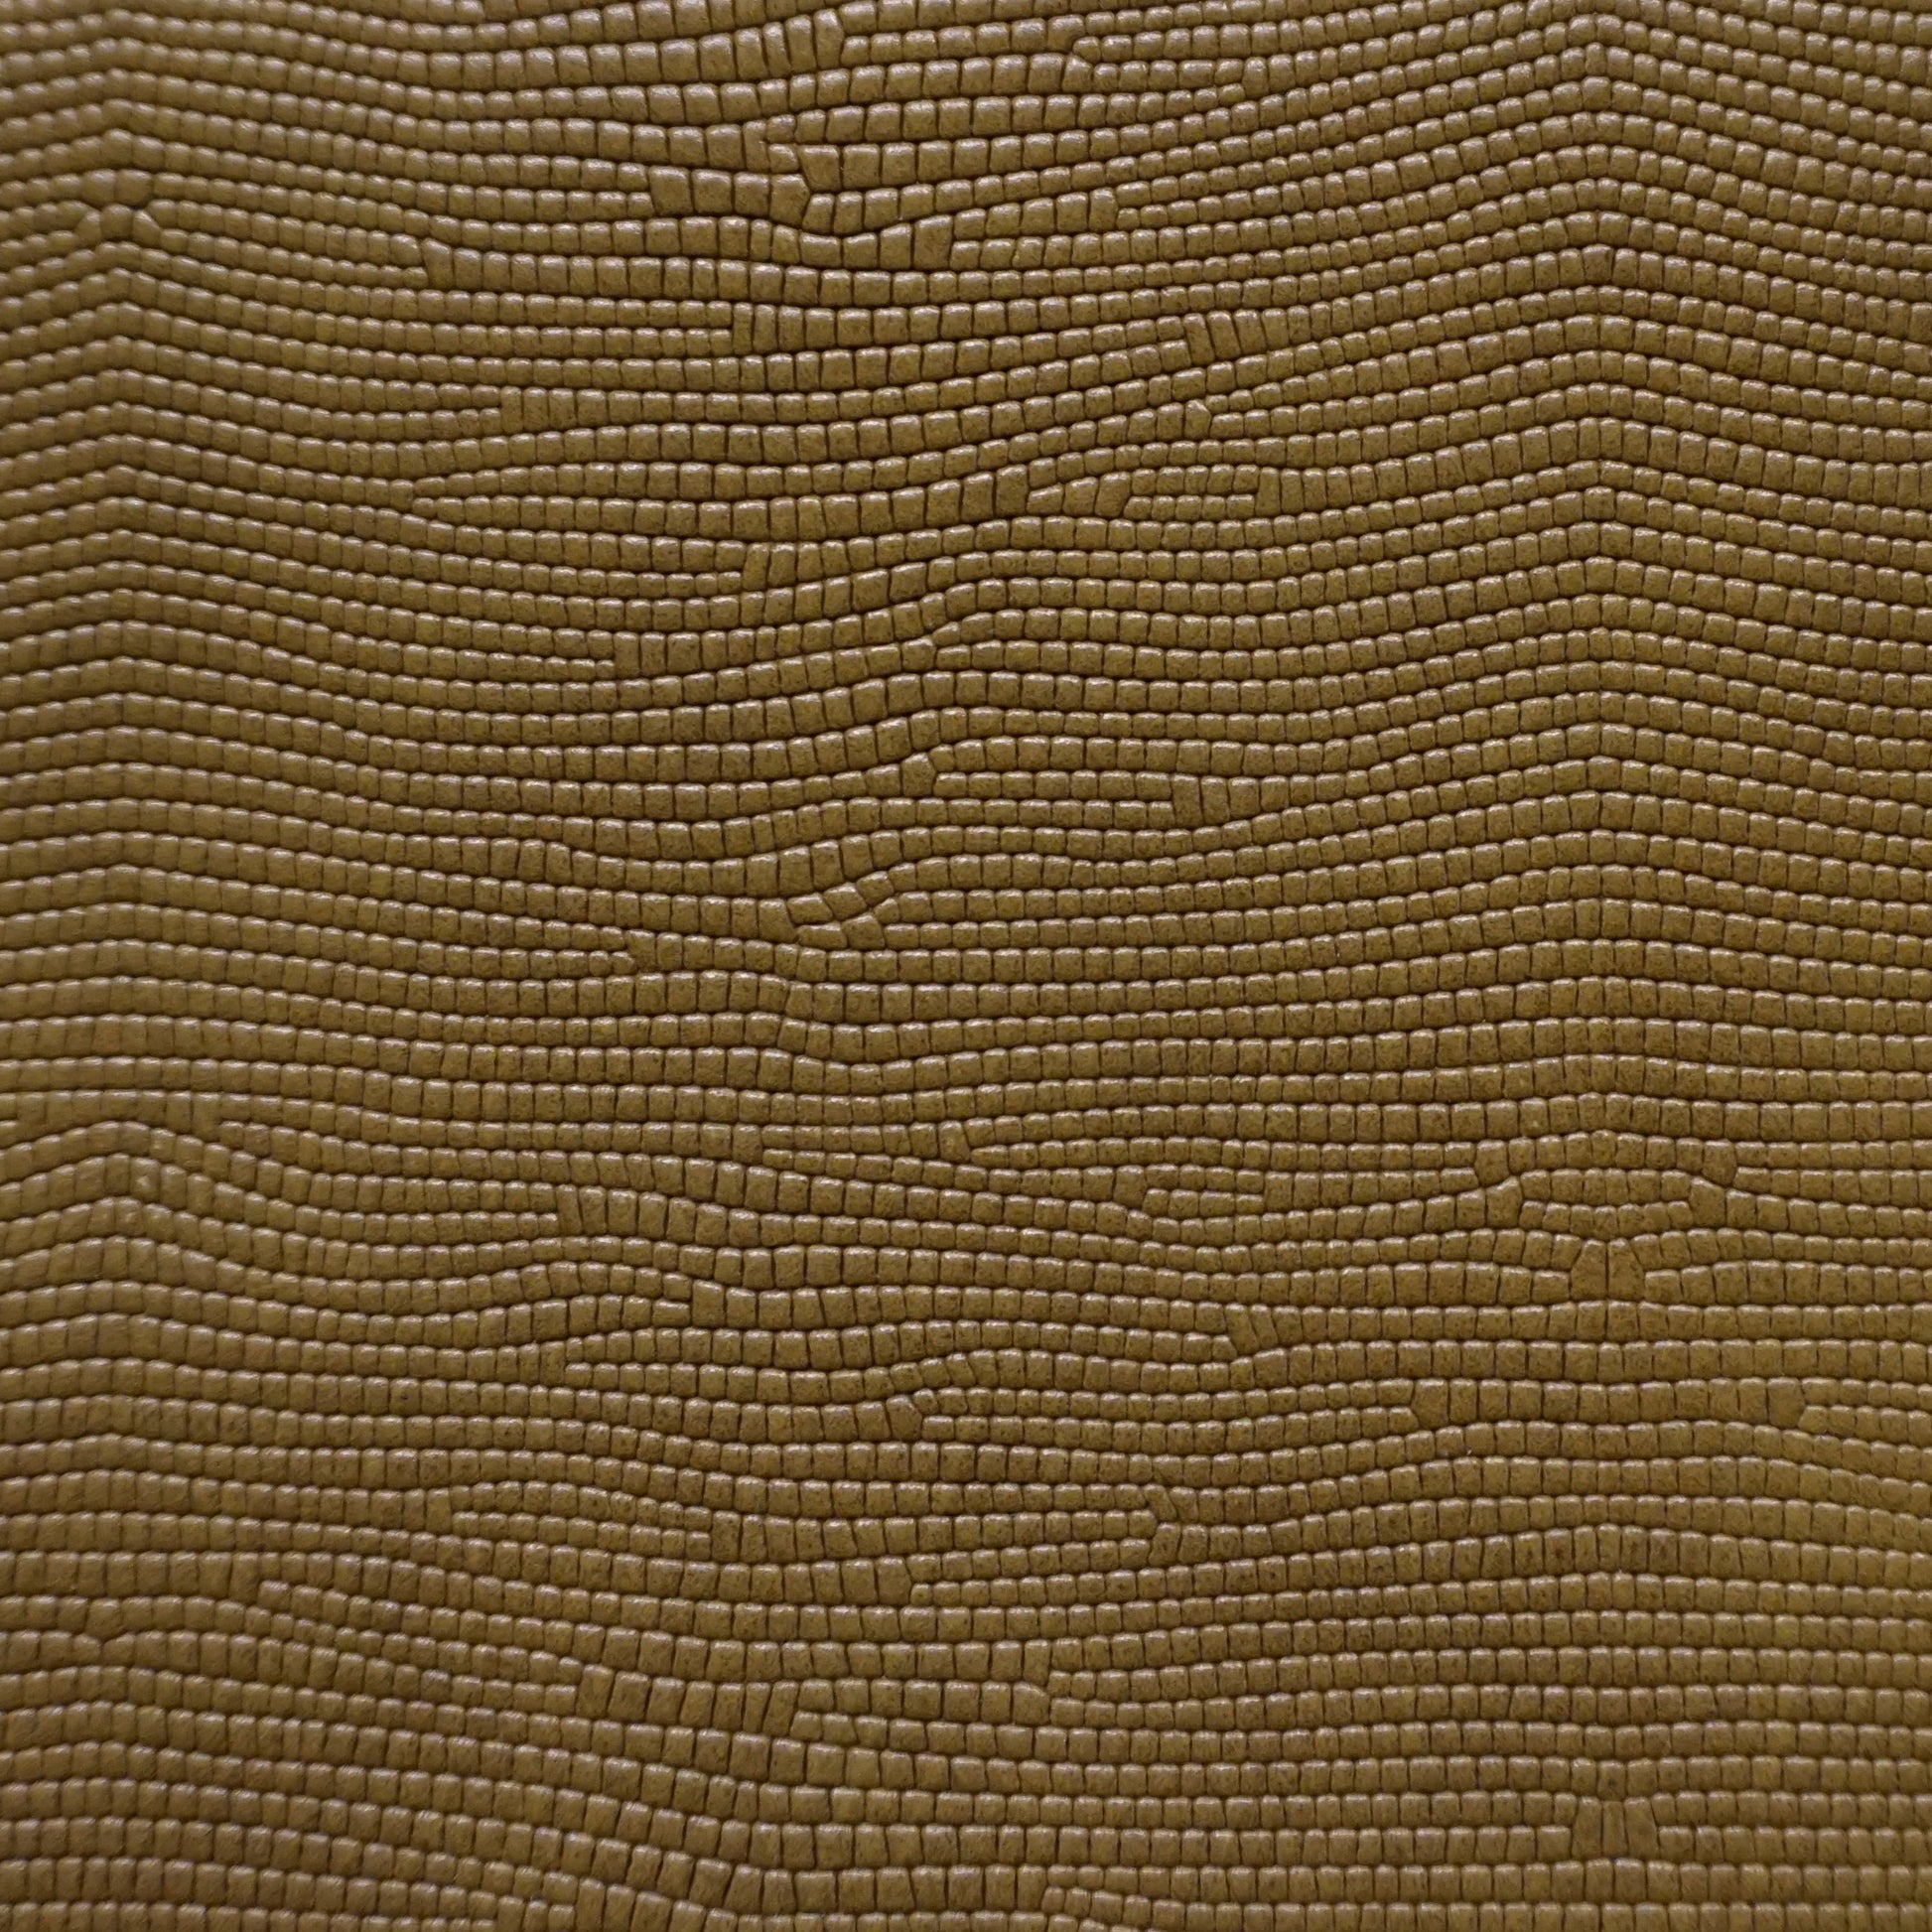 Accona, Gecko, Spilltop® Water Resistance, Hospitality Leather Hide